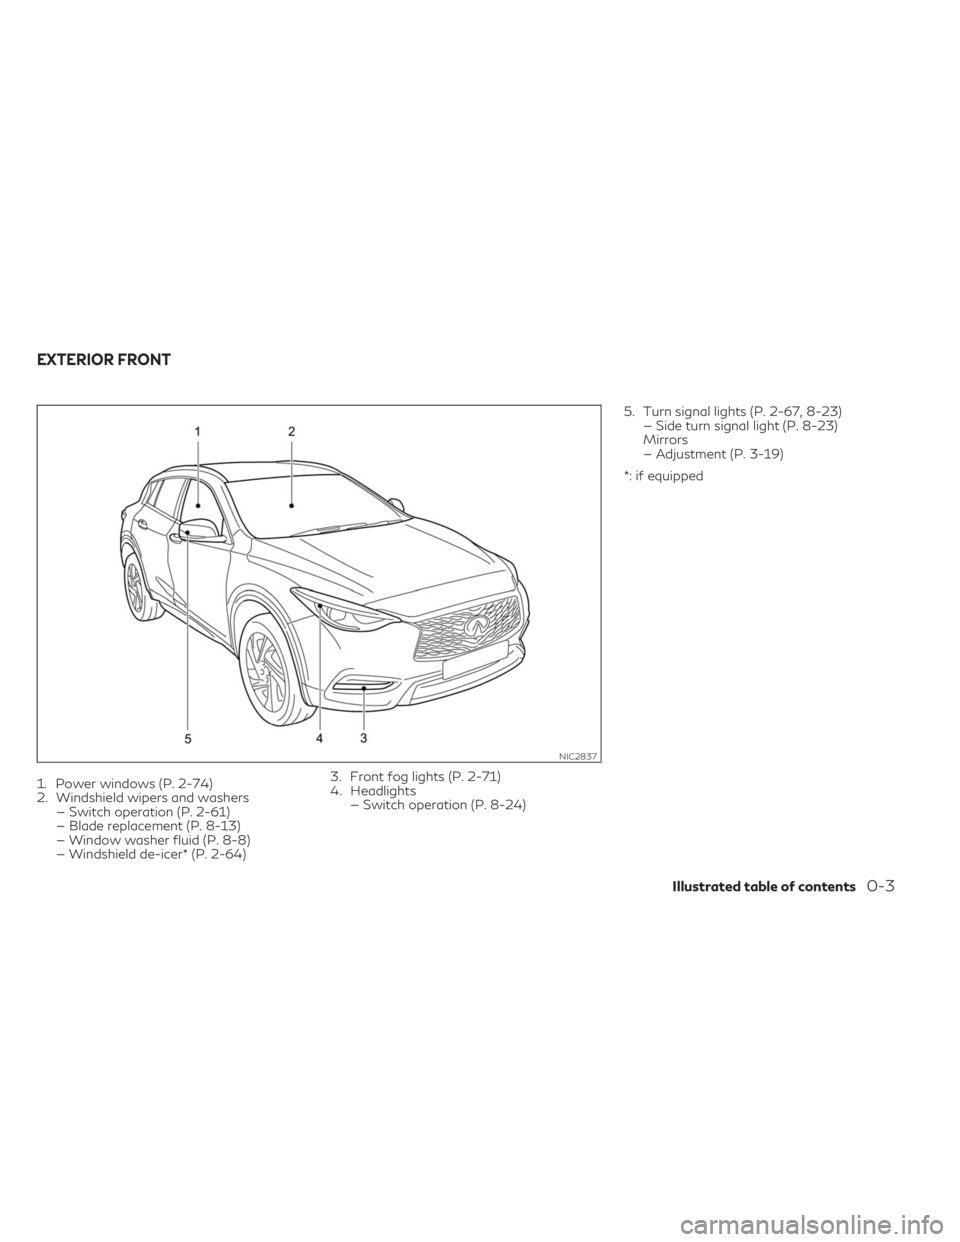 INFINITI QX30 2019  Owners Manual 1. Power windows (P. 2-74)
2. Windshield wipers and washers
— Switch operation (P. 2-61)
— Blade replacement (P. 8-13)
— Window washer fluid (P. 8-8)
— Windshield de-icer* (P. 2-64)3. Front fo